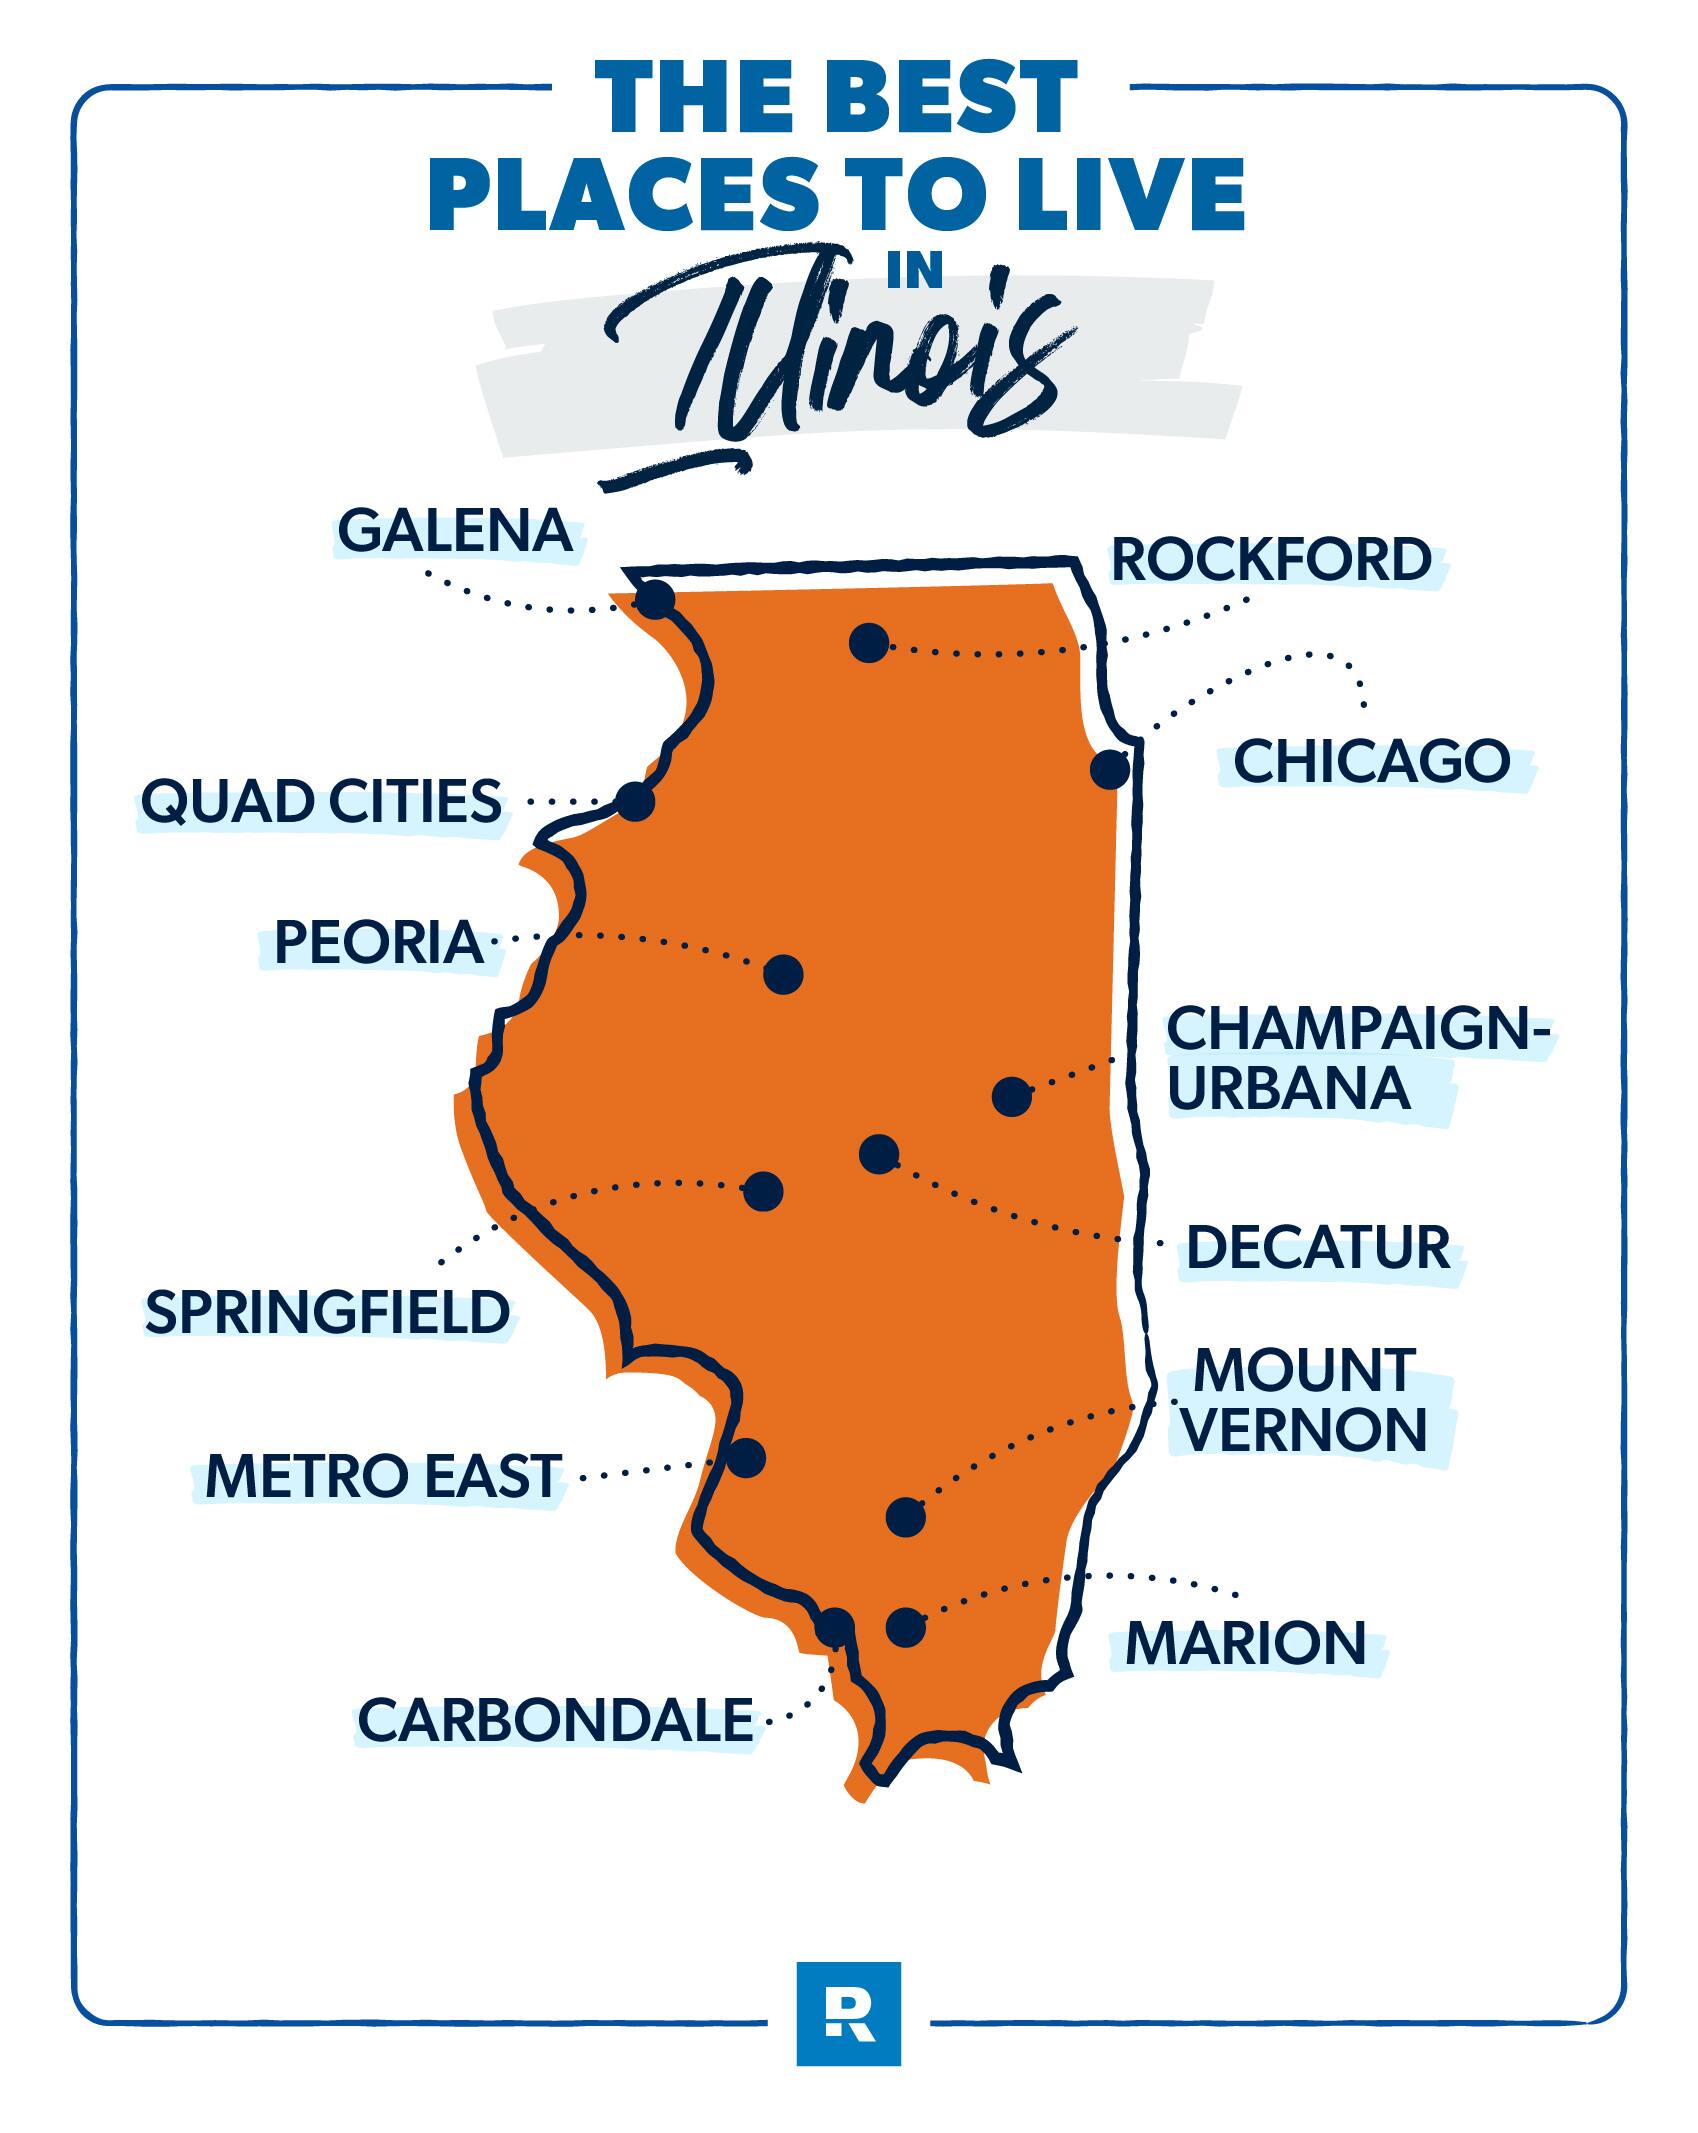 map of the state of illinois with big cities labled